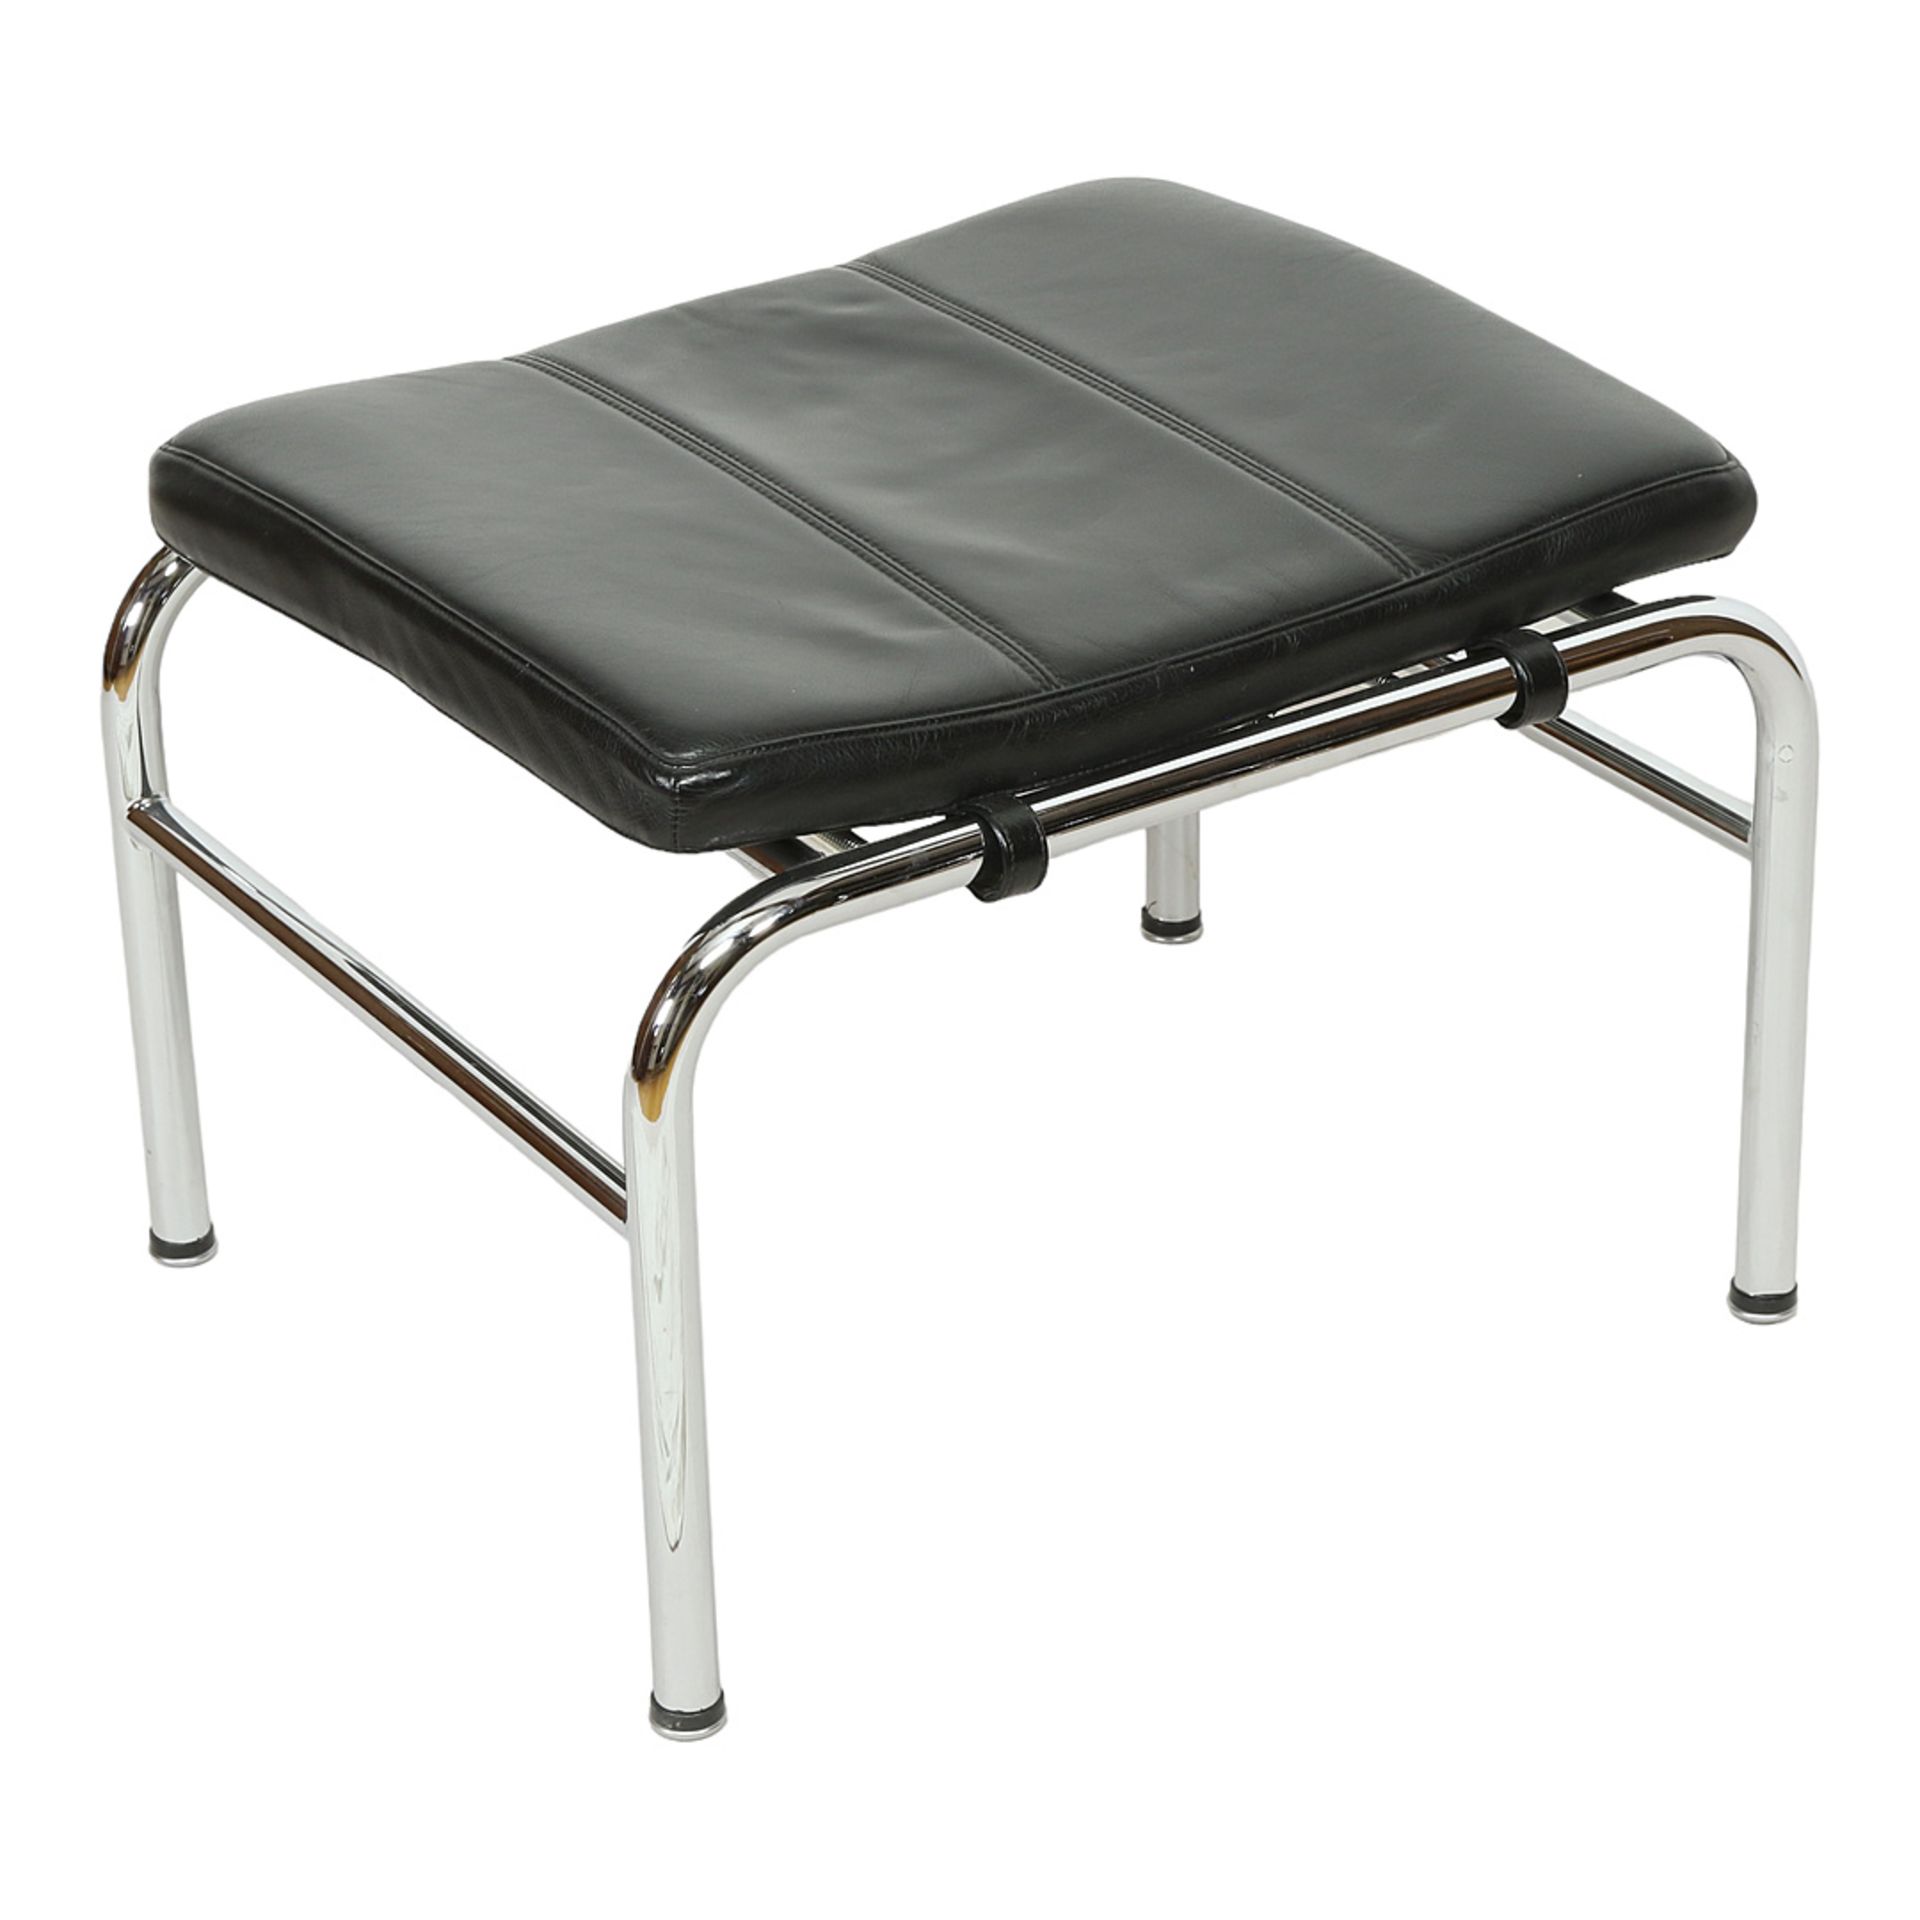 Chaise longue with stool, chrome-plated steel, black leather cover - Image 8 of 9